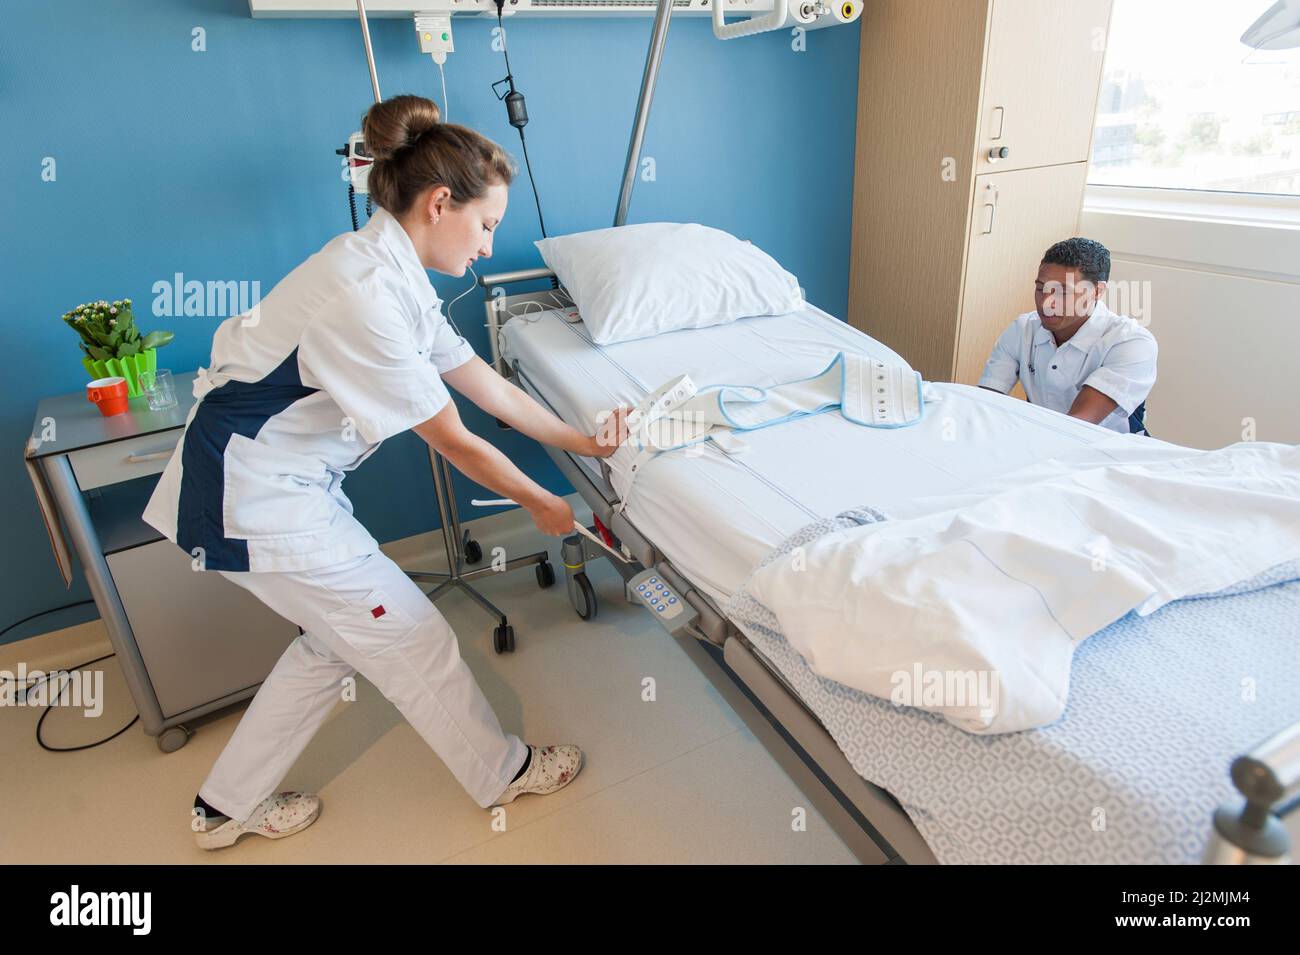 Nurses attaching a restraint band to a patient's bed Stock Photo